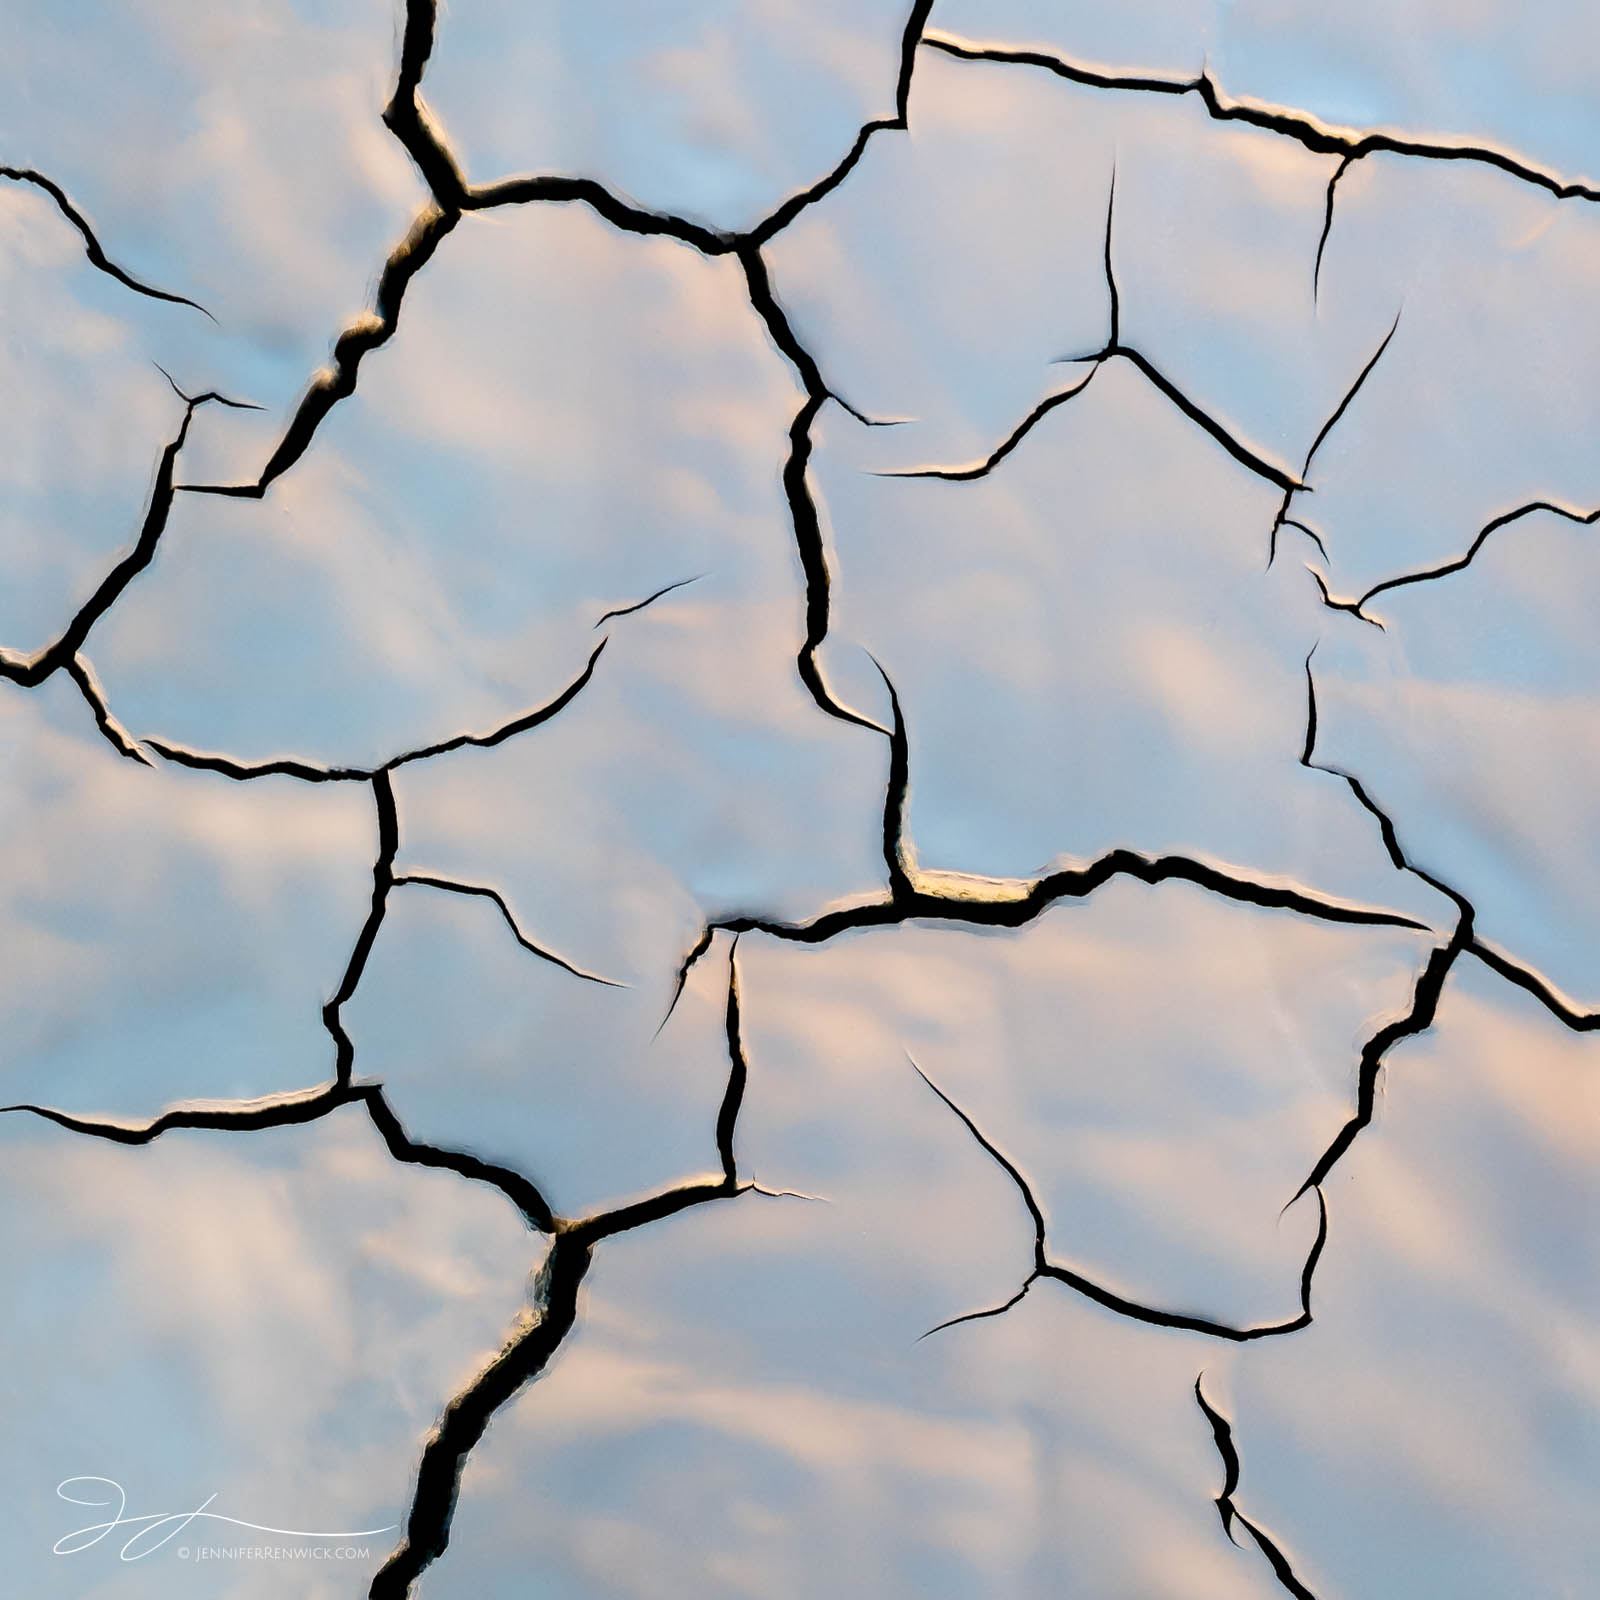 Freshly cracked mud picks up the blue of the sky as it reflects off the wet mud.